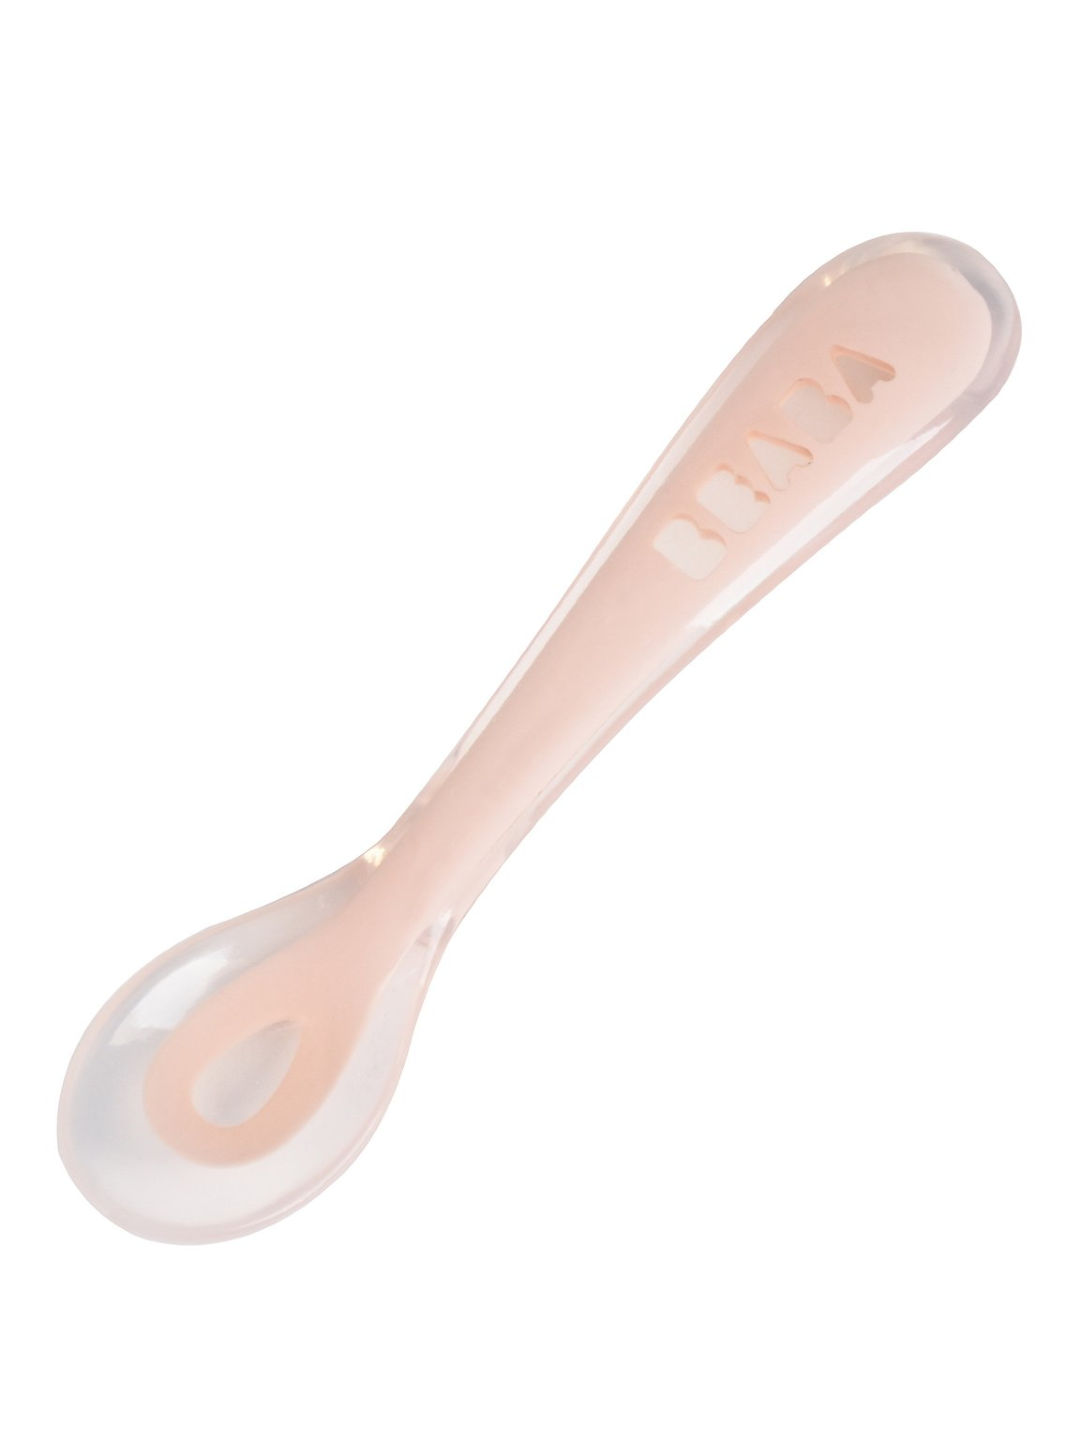 Beaba Silicone Spoon 2nd Age